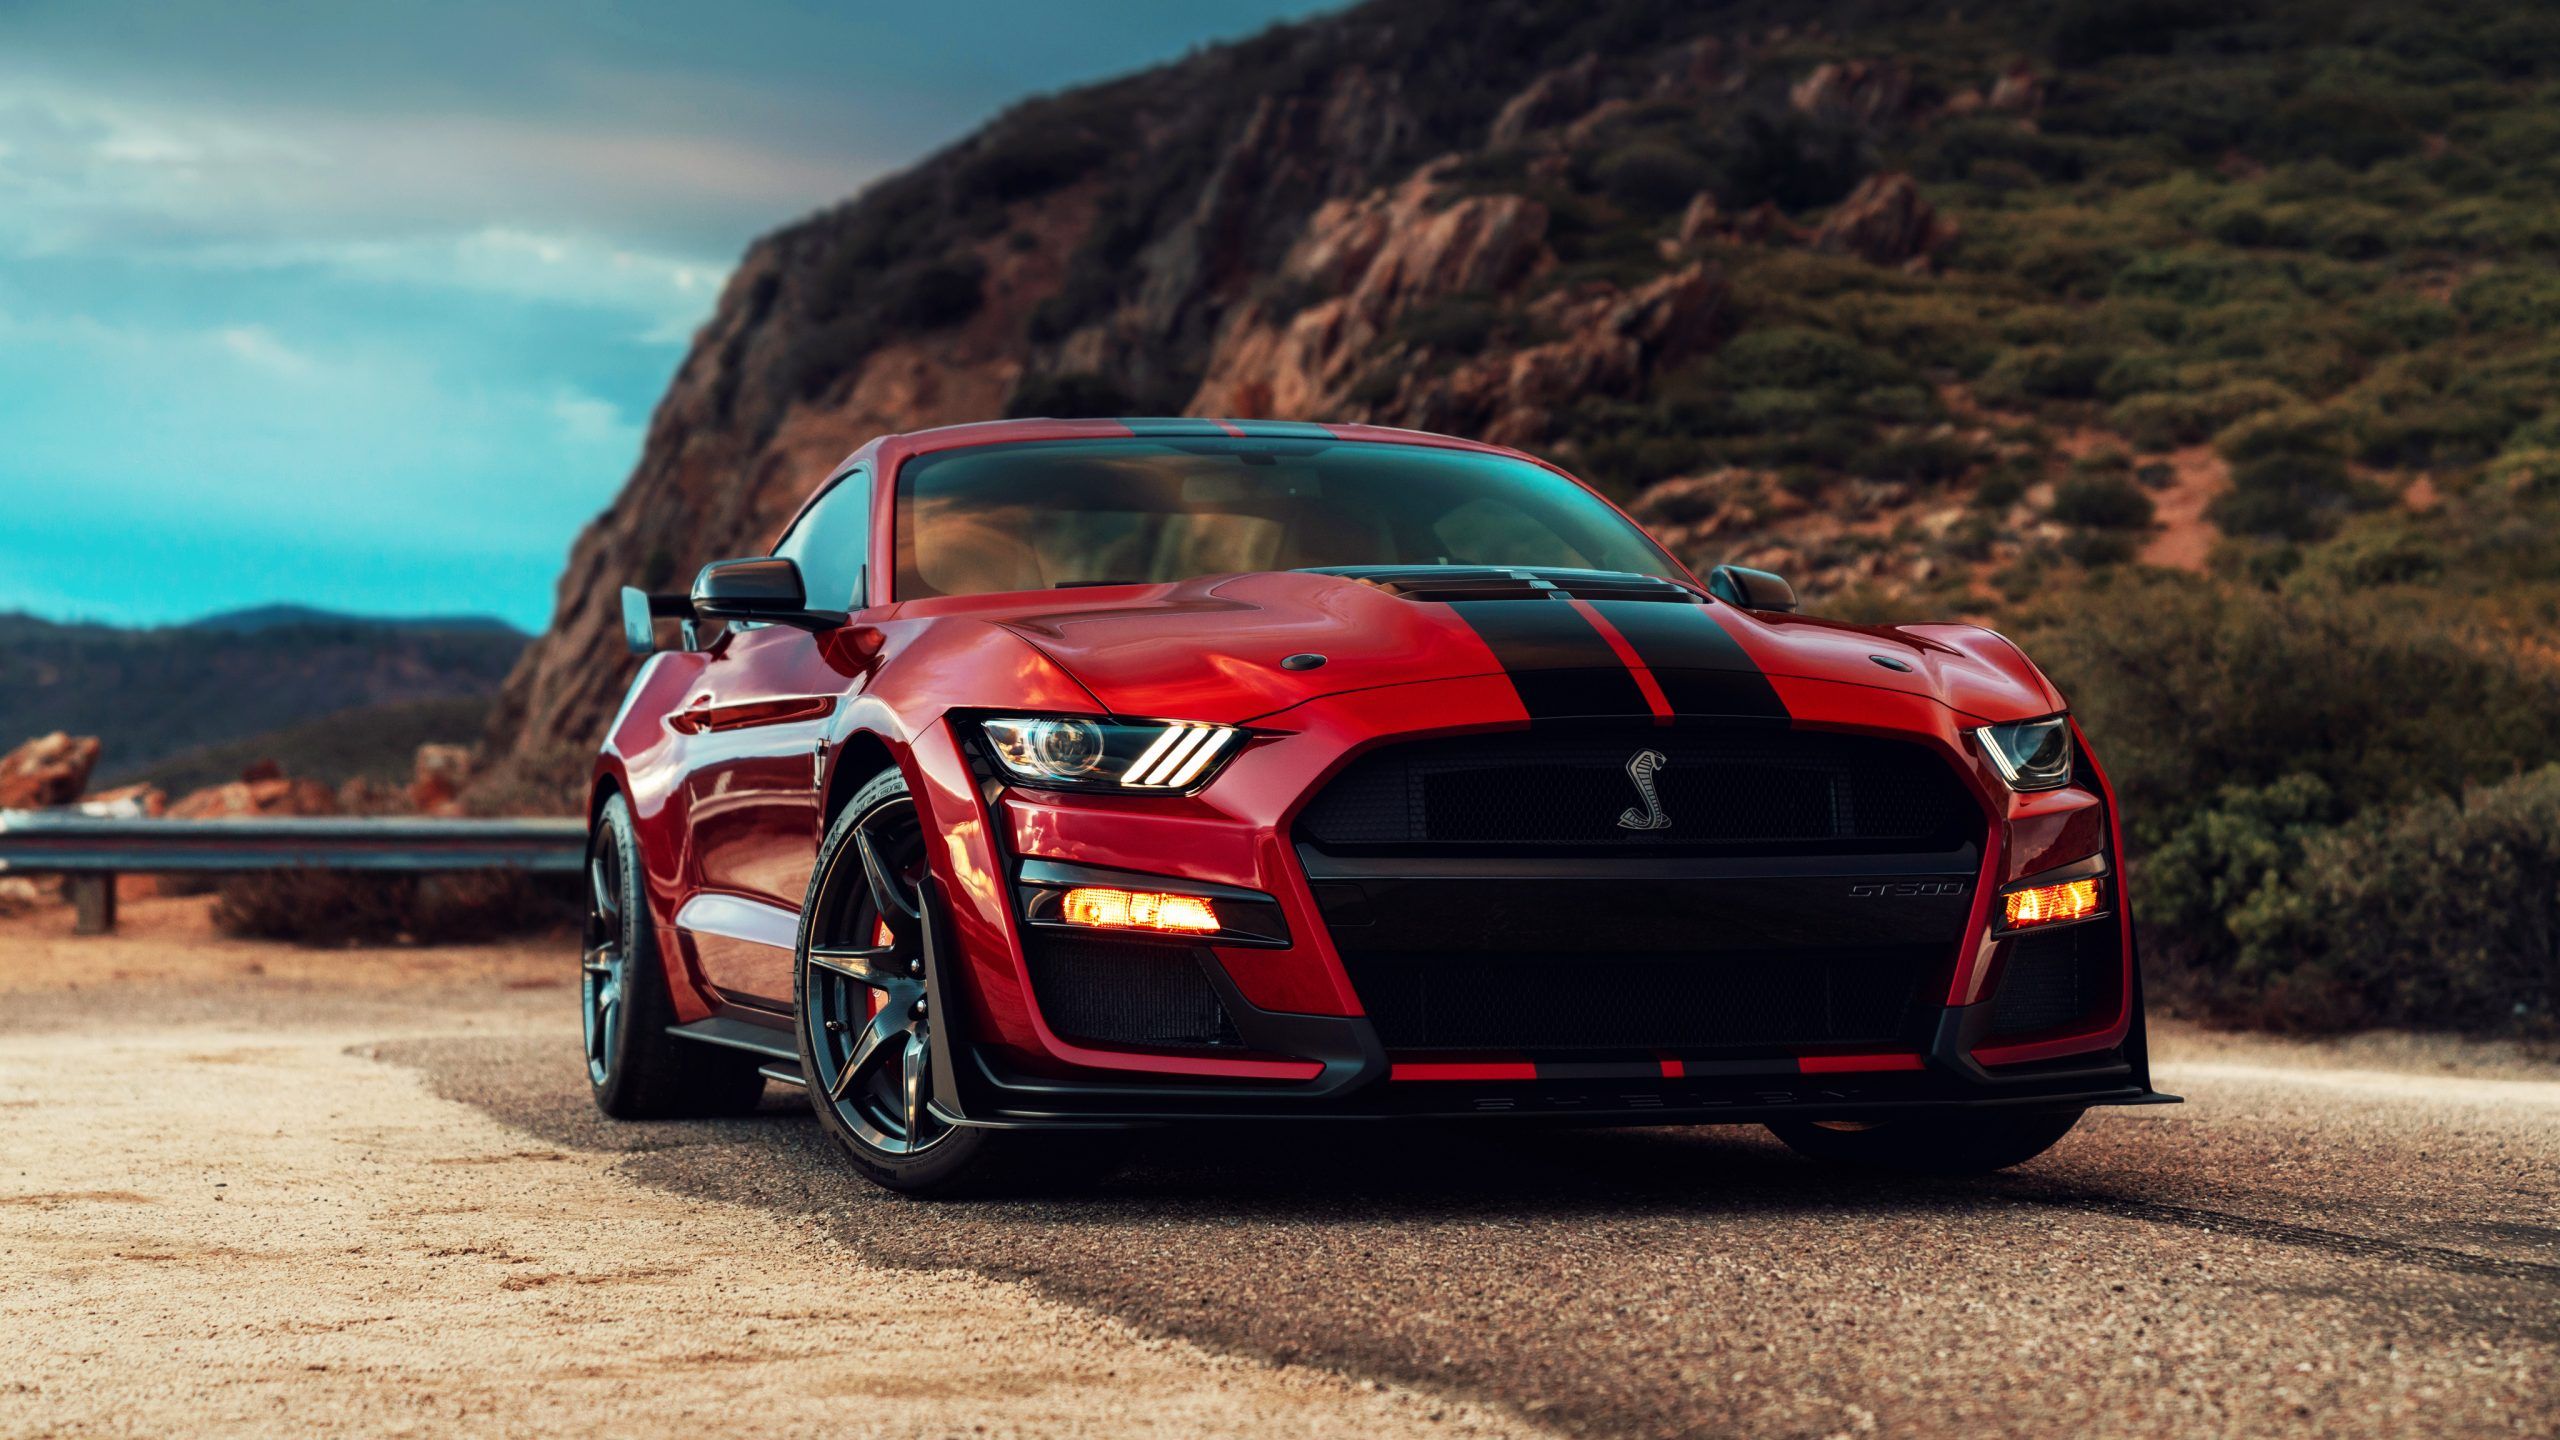 Ford Updates the Mustang and Shelby GT500 for 2021 Model Year